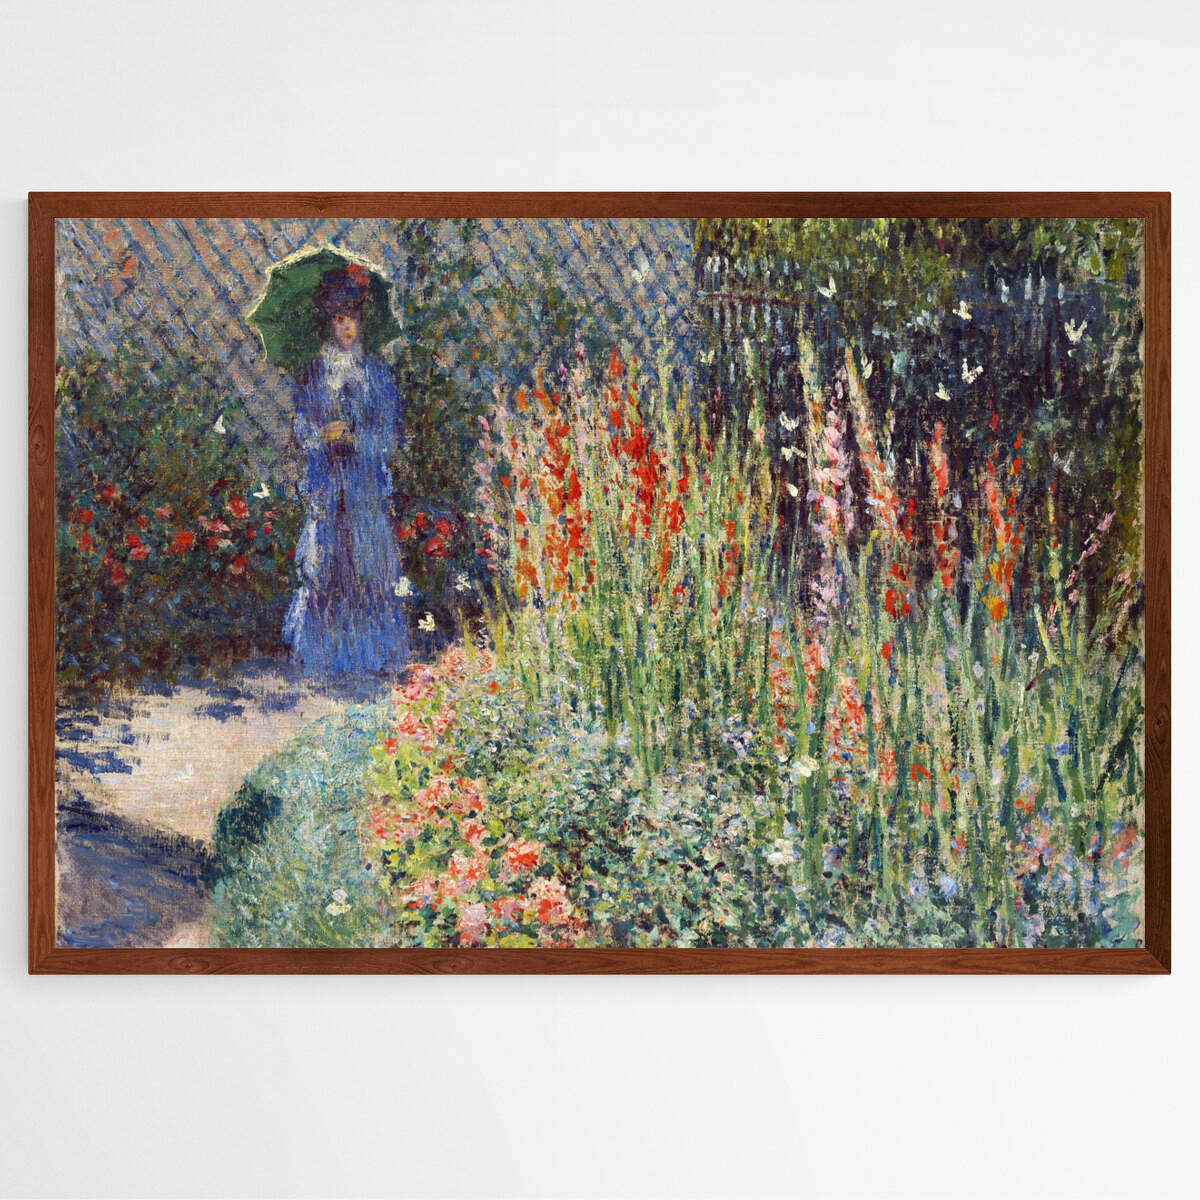 Rounded Flower Bed by Claude Monet | Claude Monet Wall Art Prints - The Canvas Hive